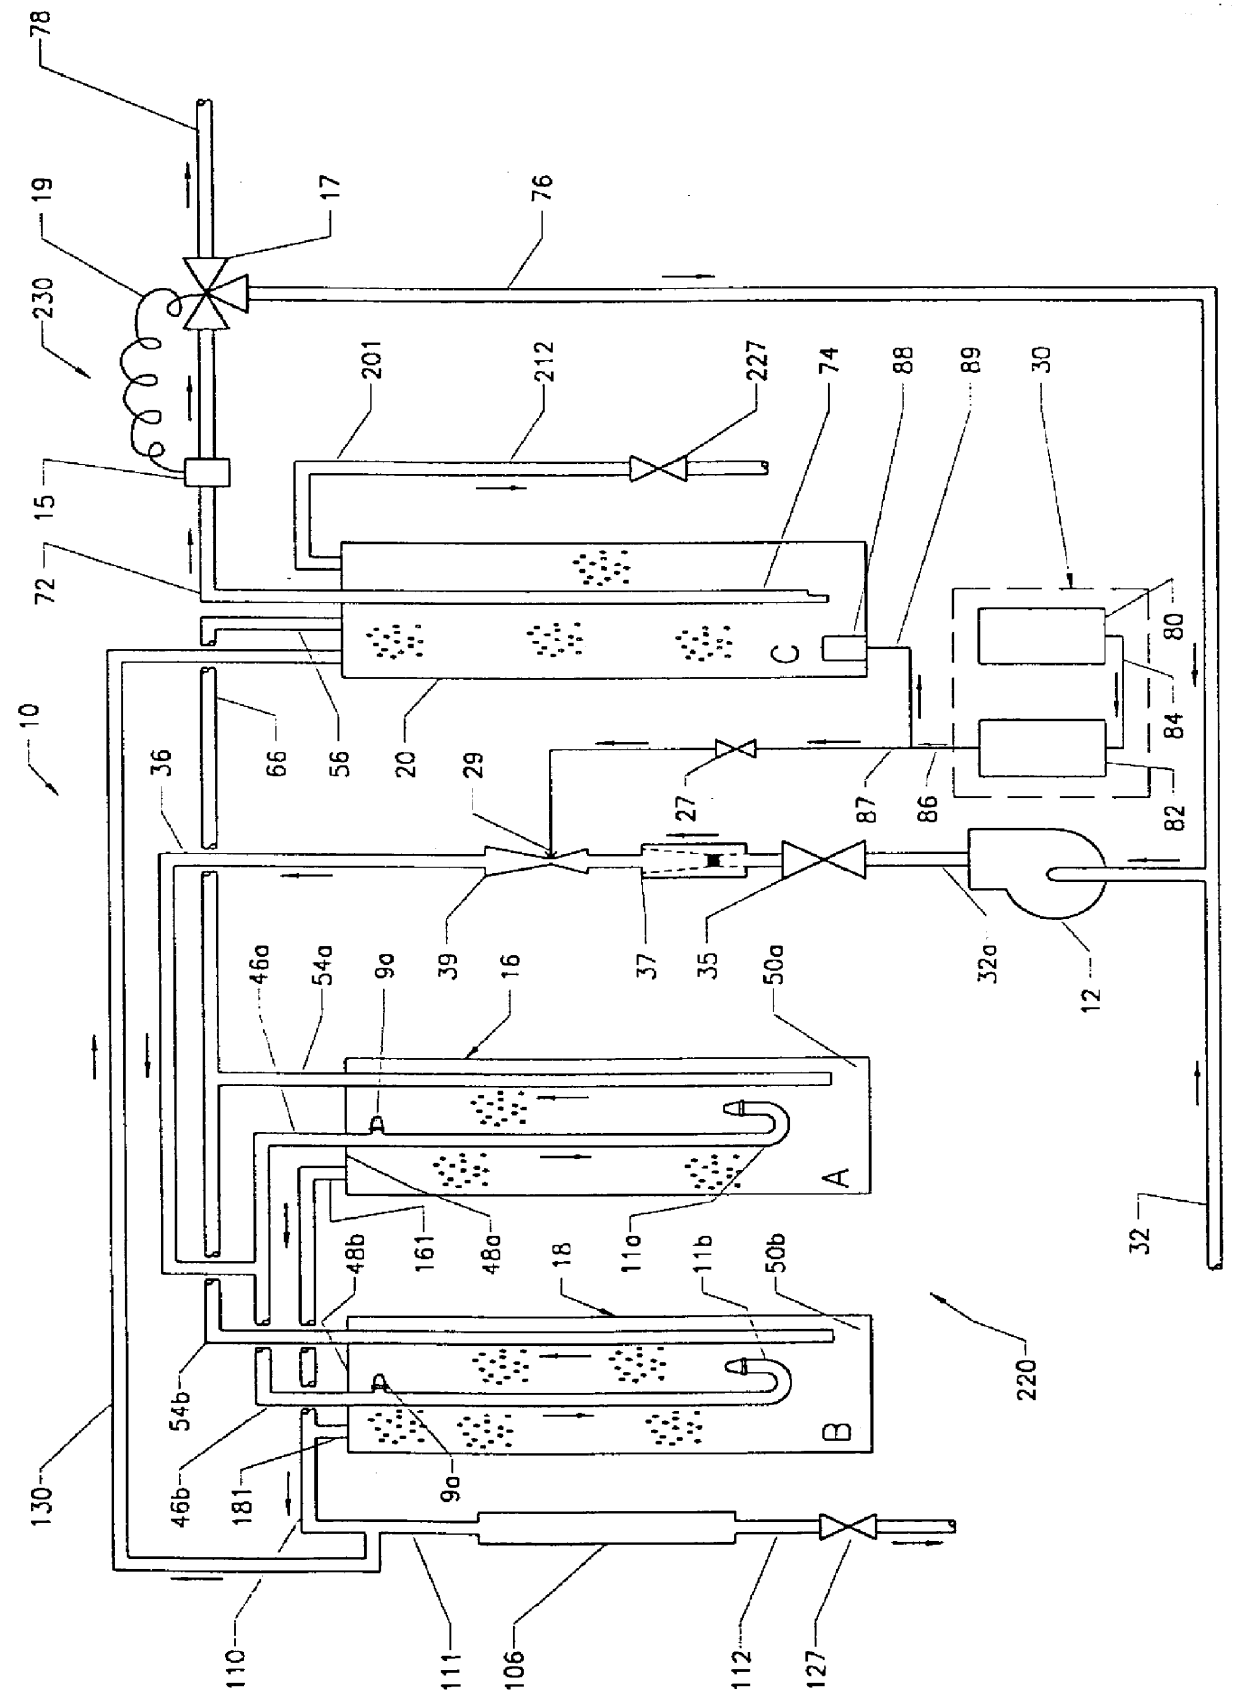 Apparatus for the purification of water and method therefor